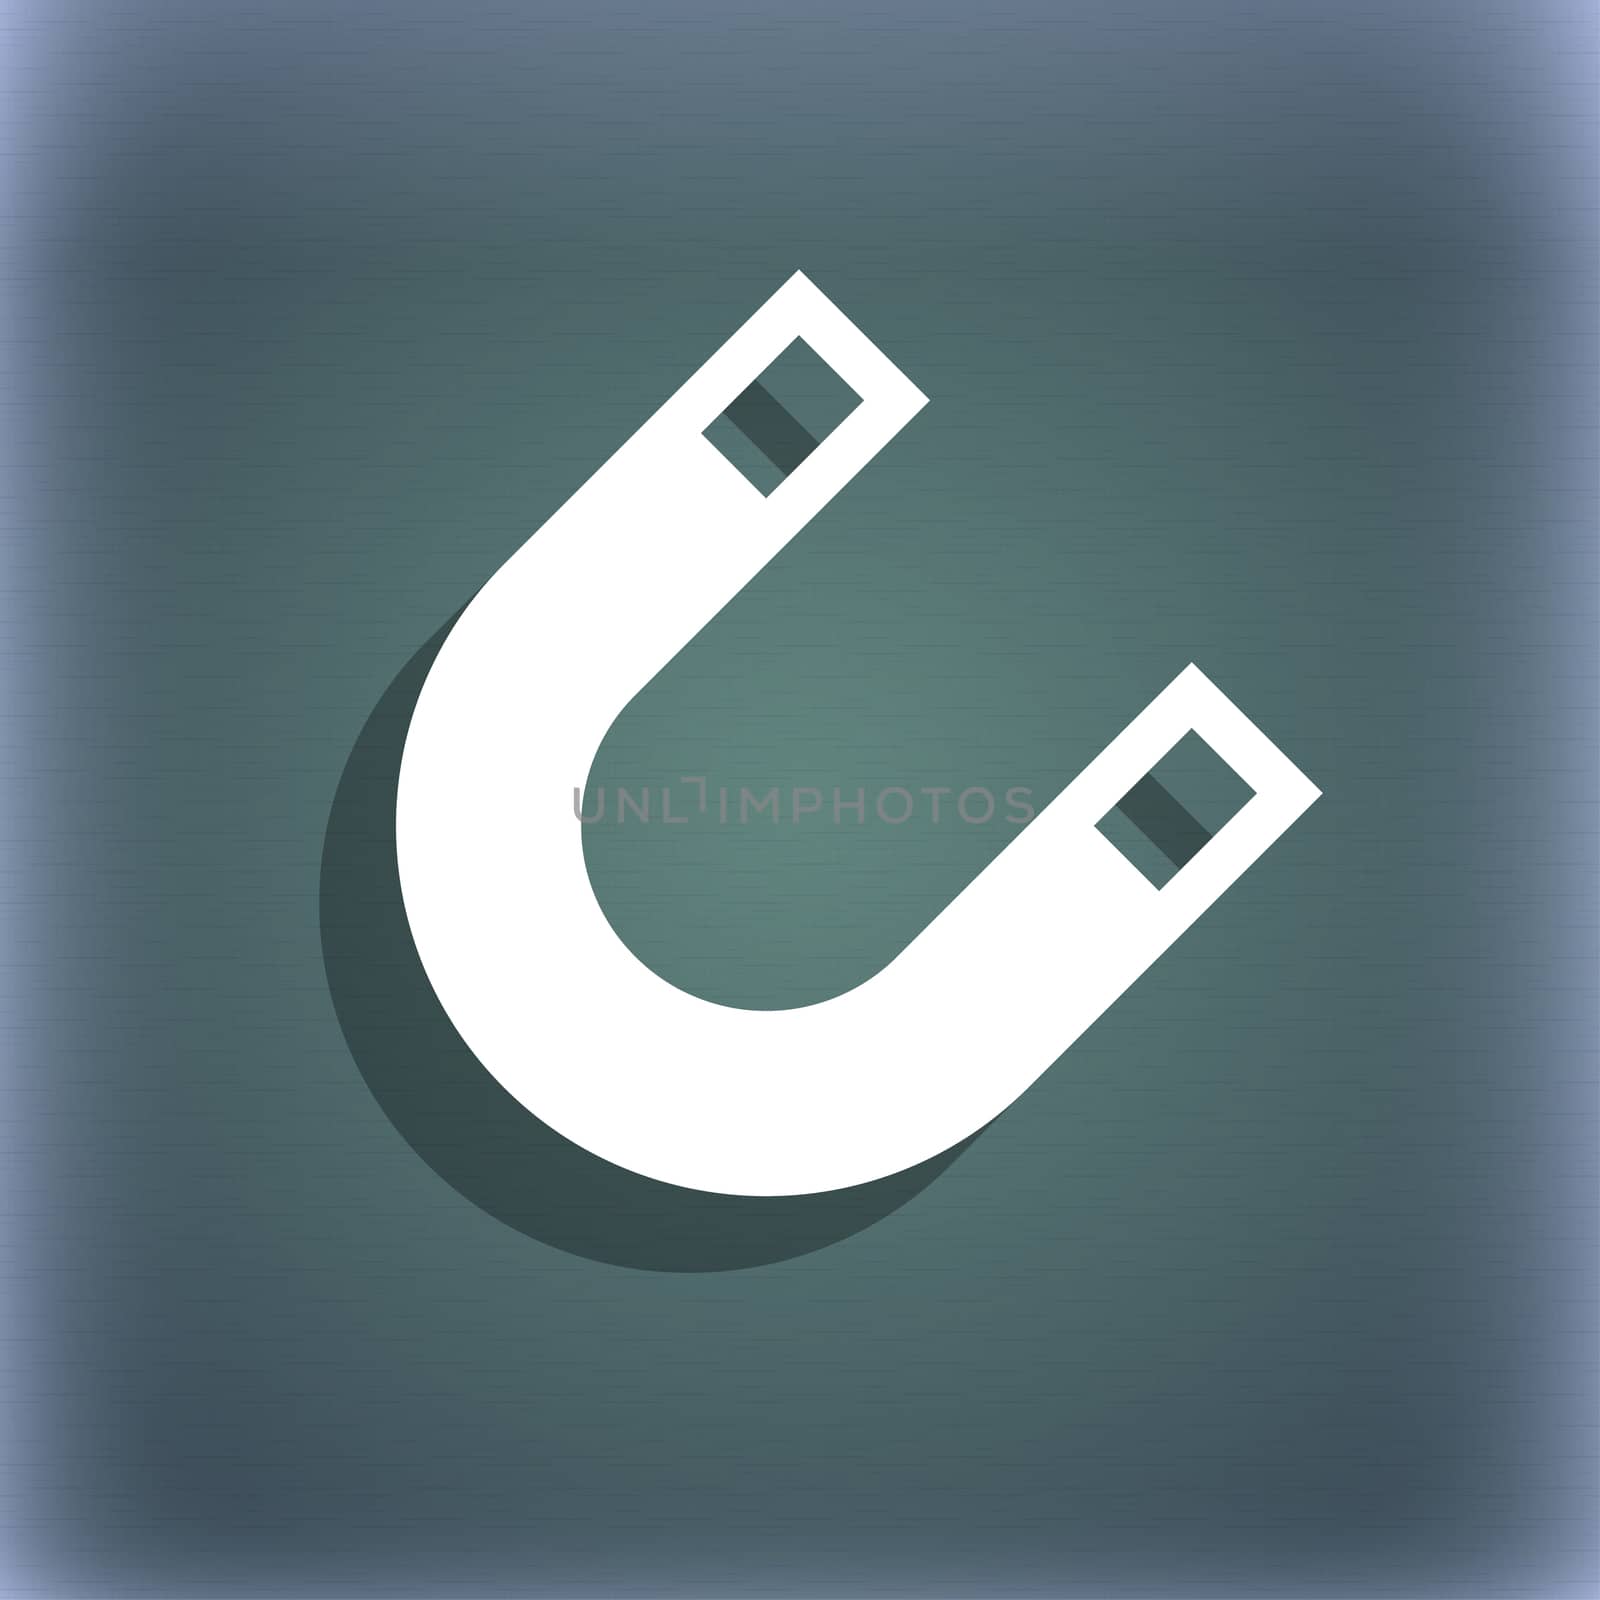 magnet, horseshoe icon symbol on the blue-green abstract background with shadow and space for your text. illustration